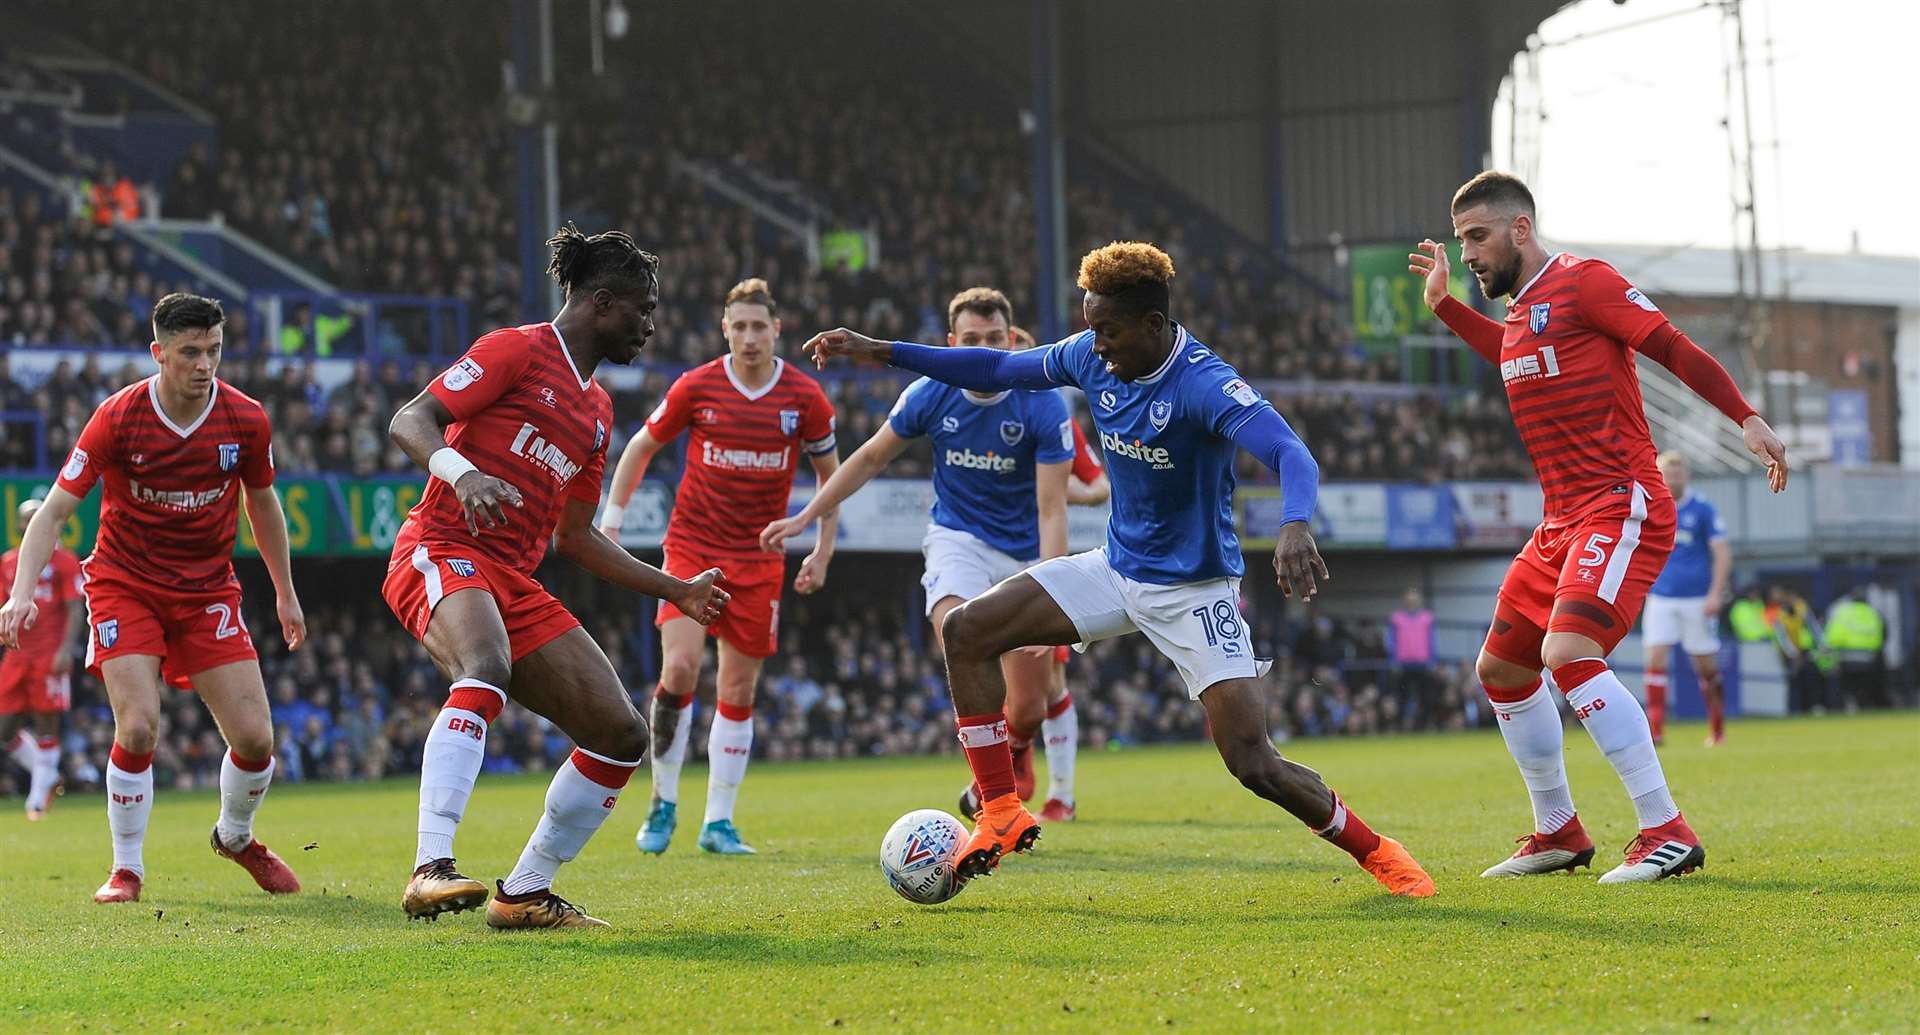 Portsmouth's Jamal Lowe cuts through the Gills defence to score the opening goal last season Picture: Ady Kerry